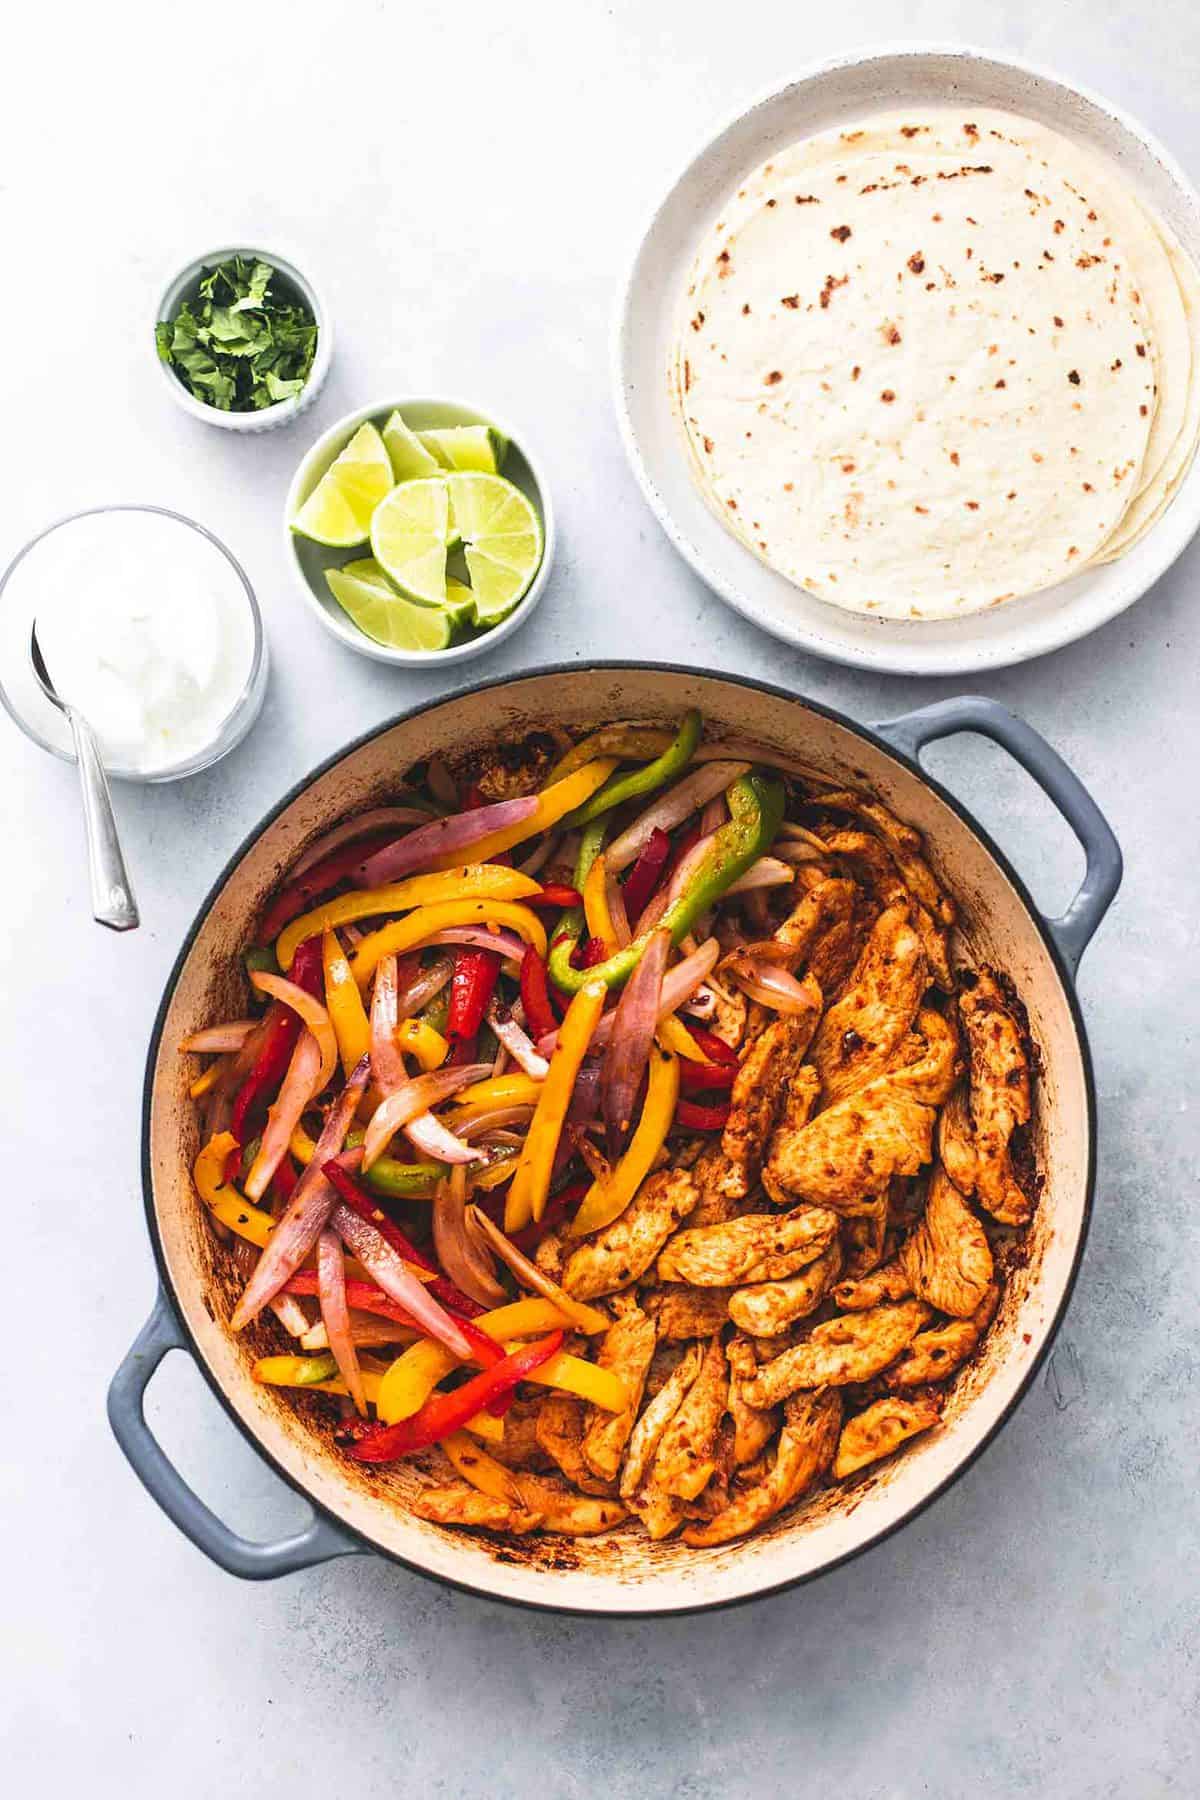 top view of chicken fajitas skillet with bowls of lime slices, cilantro and sour cream and a plate of tortillas on the side.